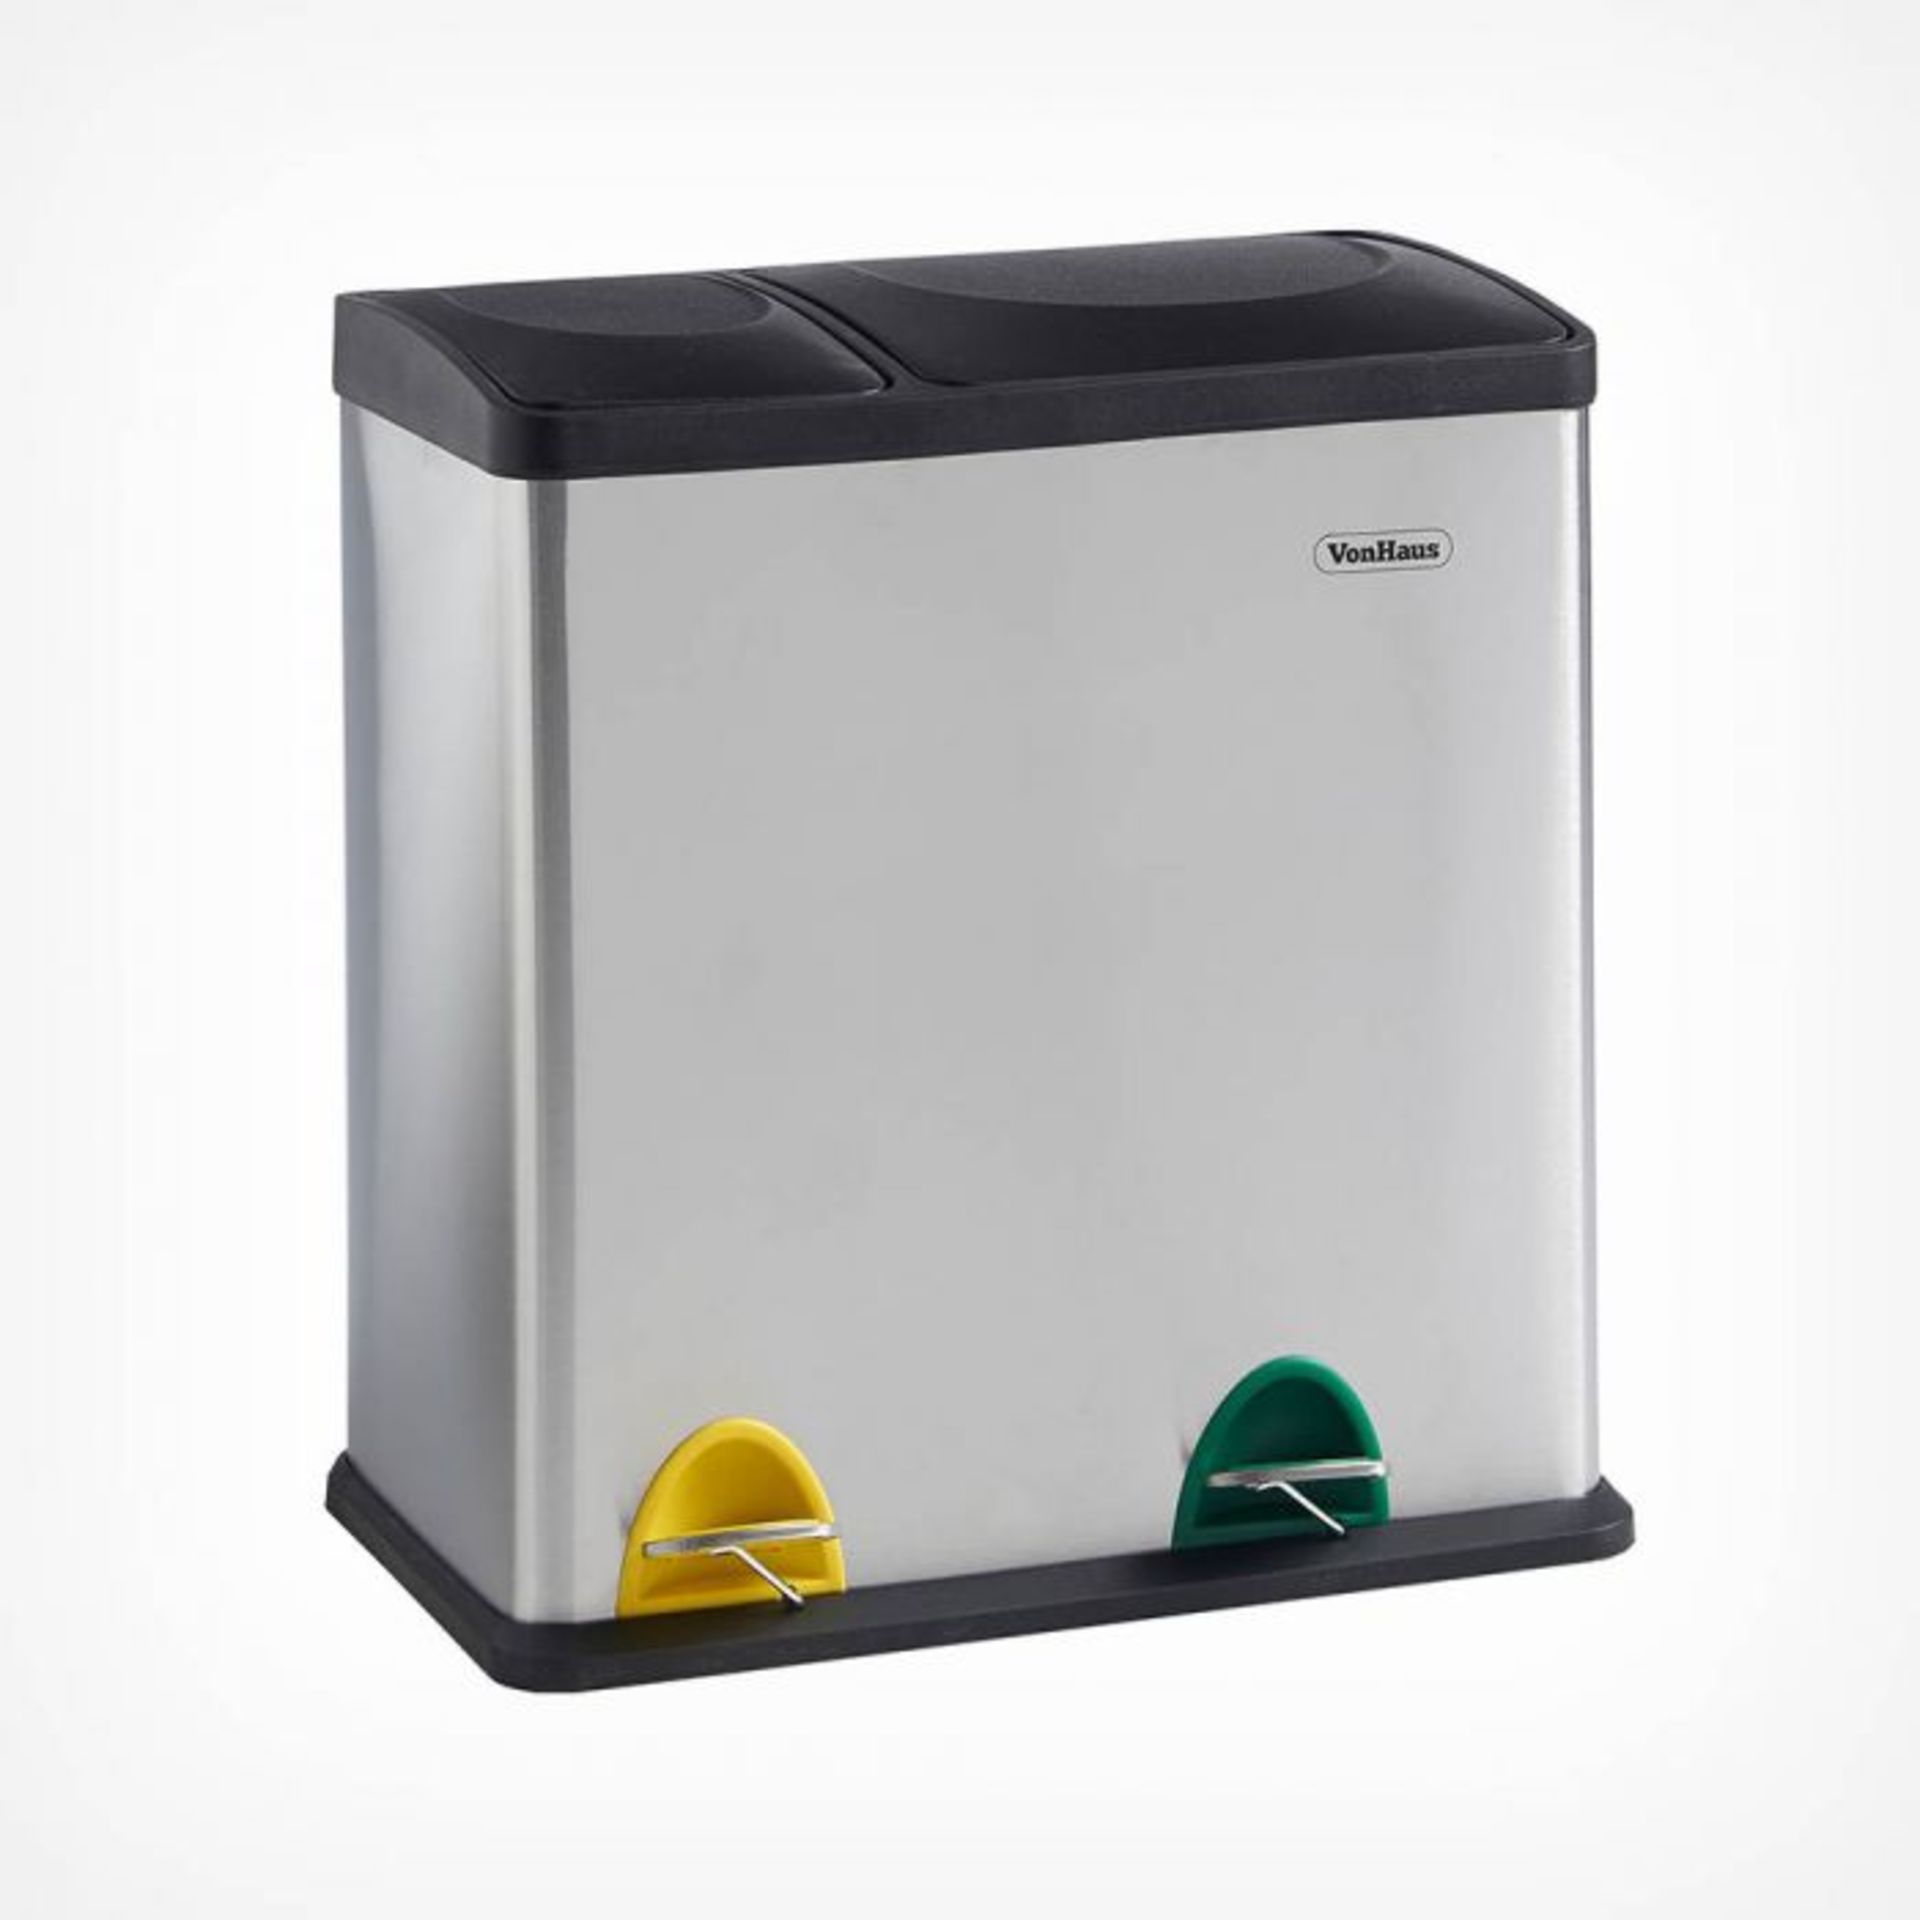 (S334) 36L 2 in 1 Recycling Bin Streamline your recycling routine! Suitable for general househ... - Image 2 of 3